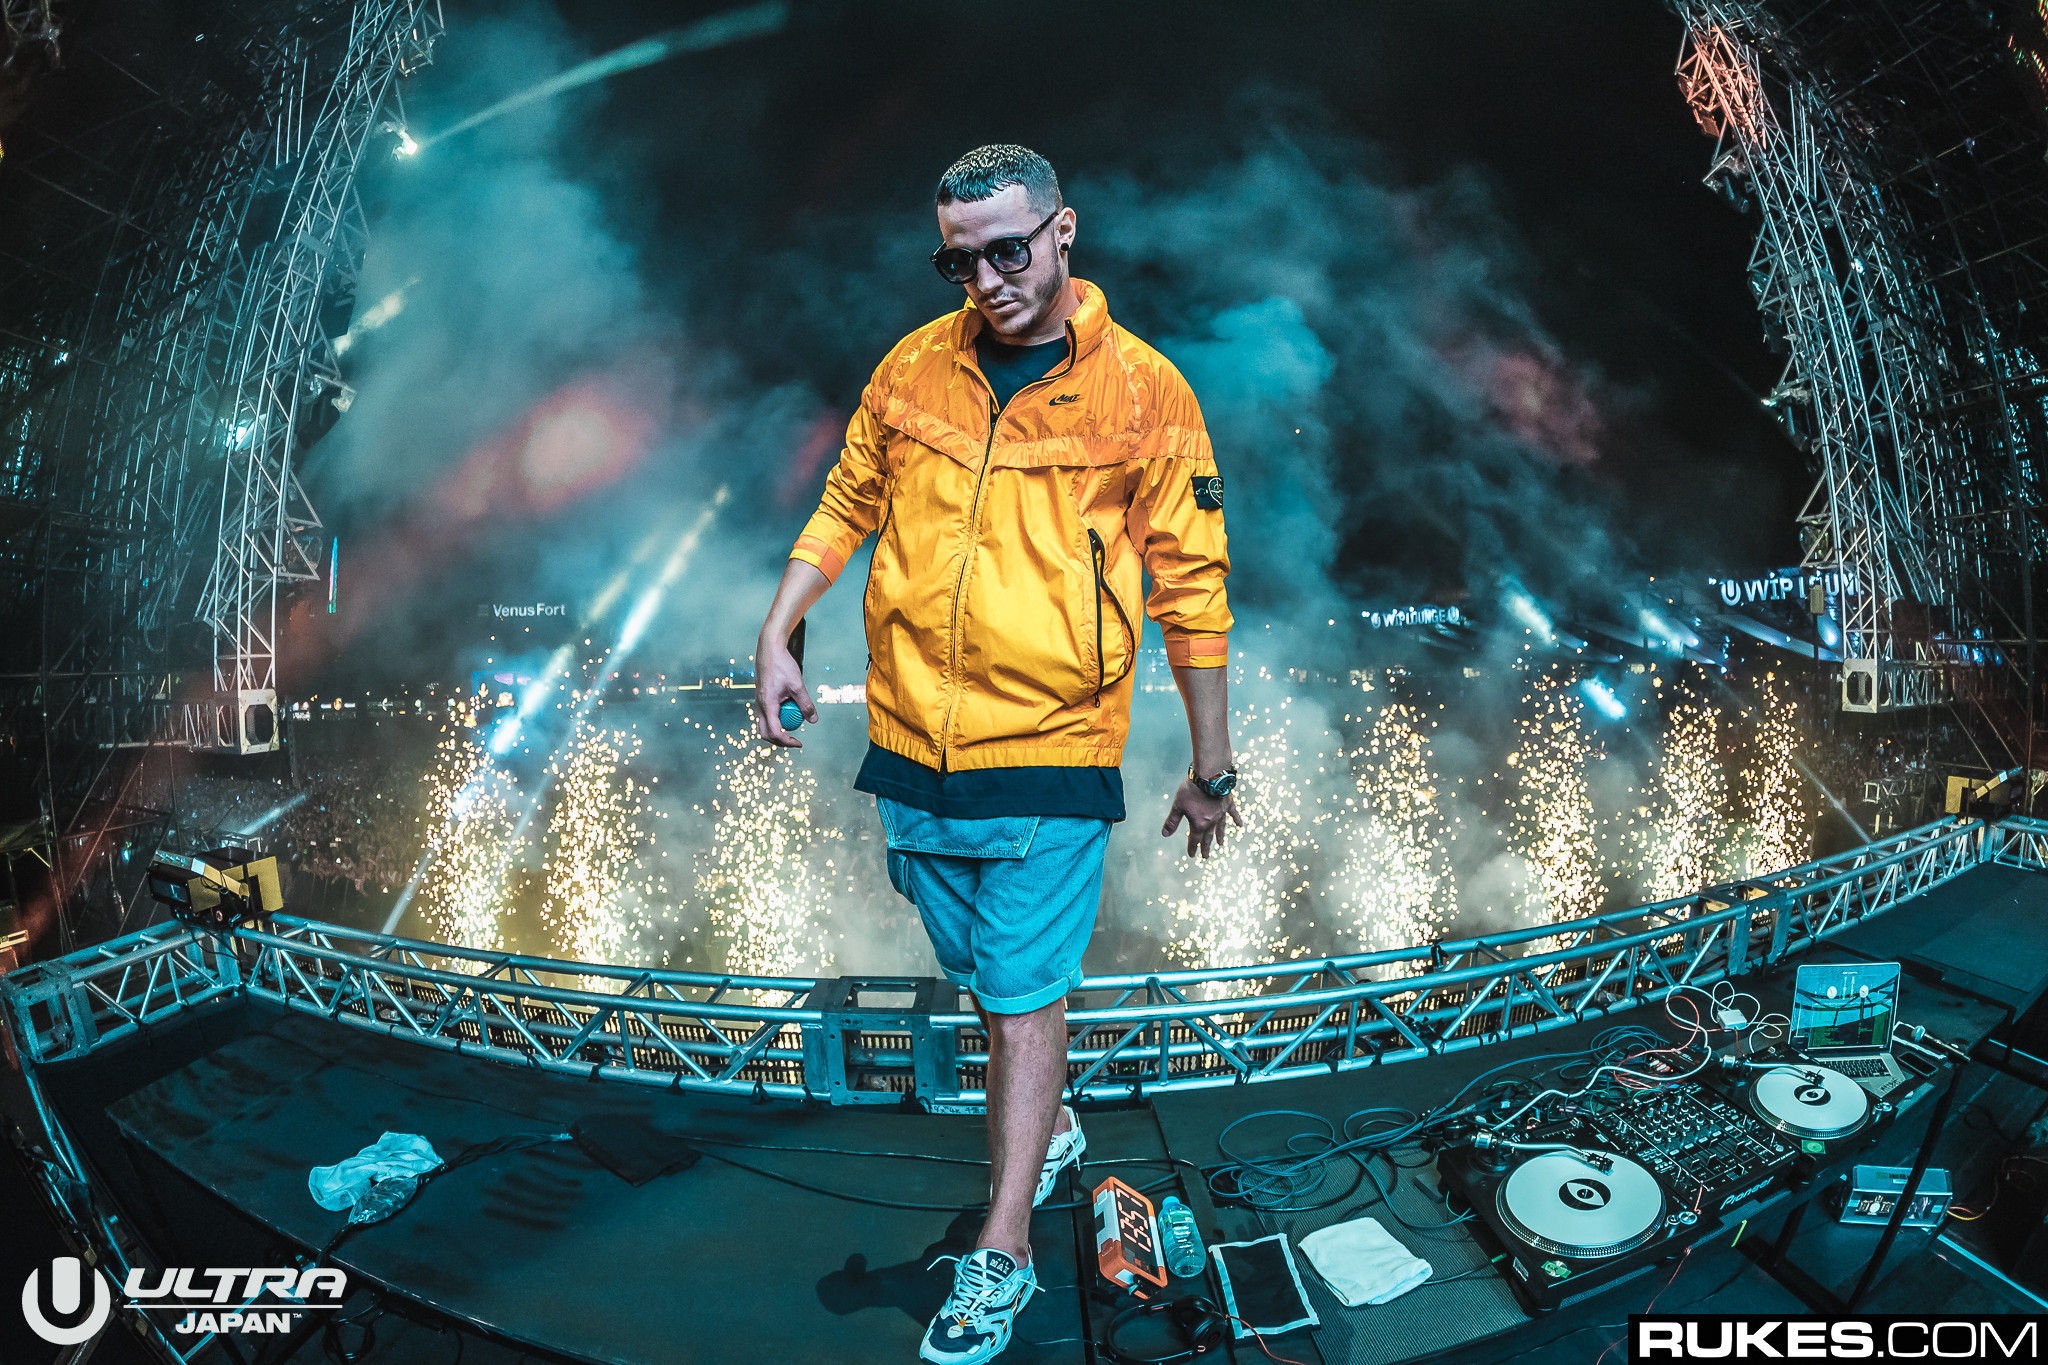 2048x1365 DJ Snake Wants Your Dance Moves For His New Music Video [DETAILS]